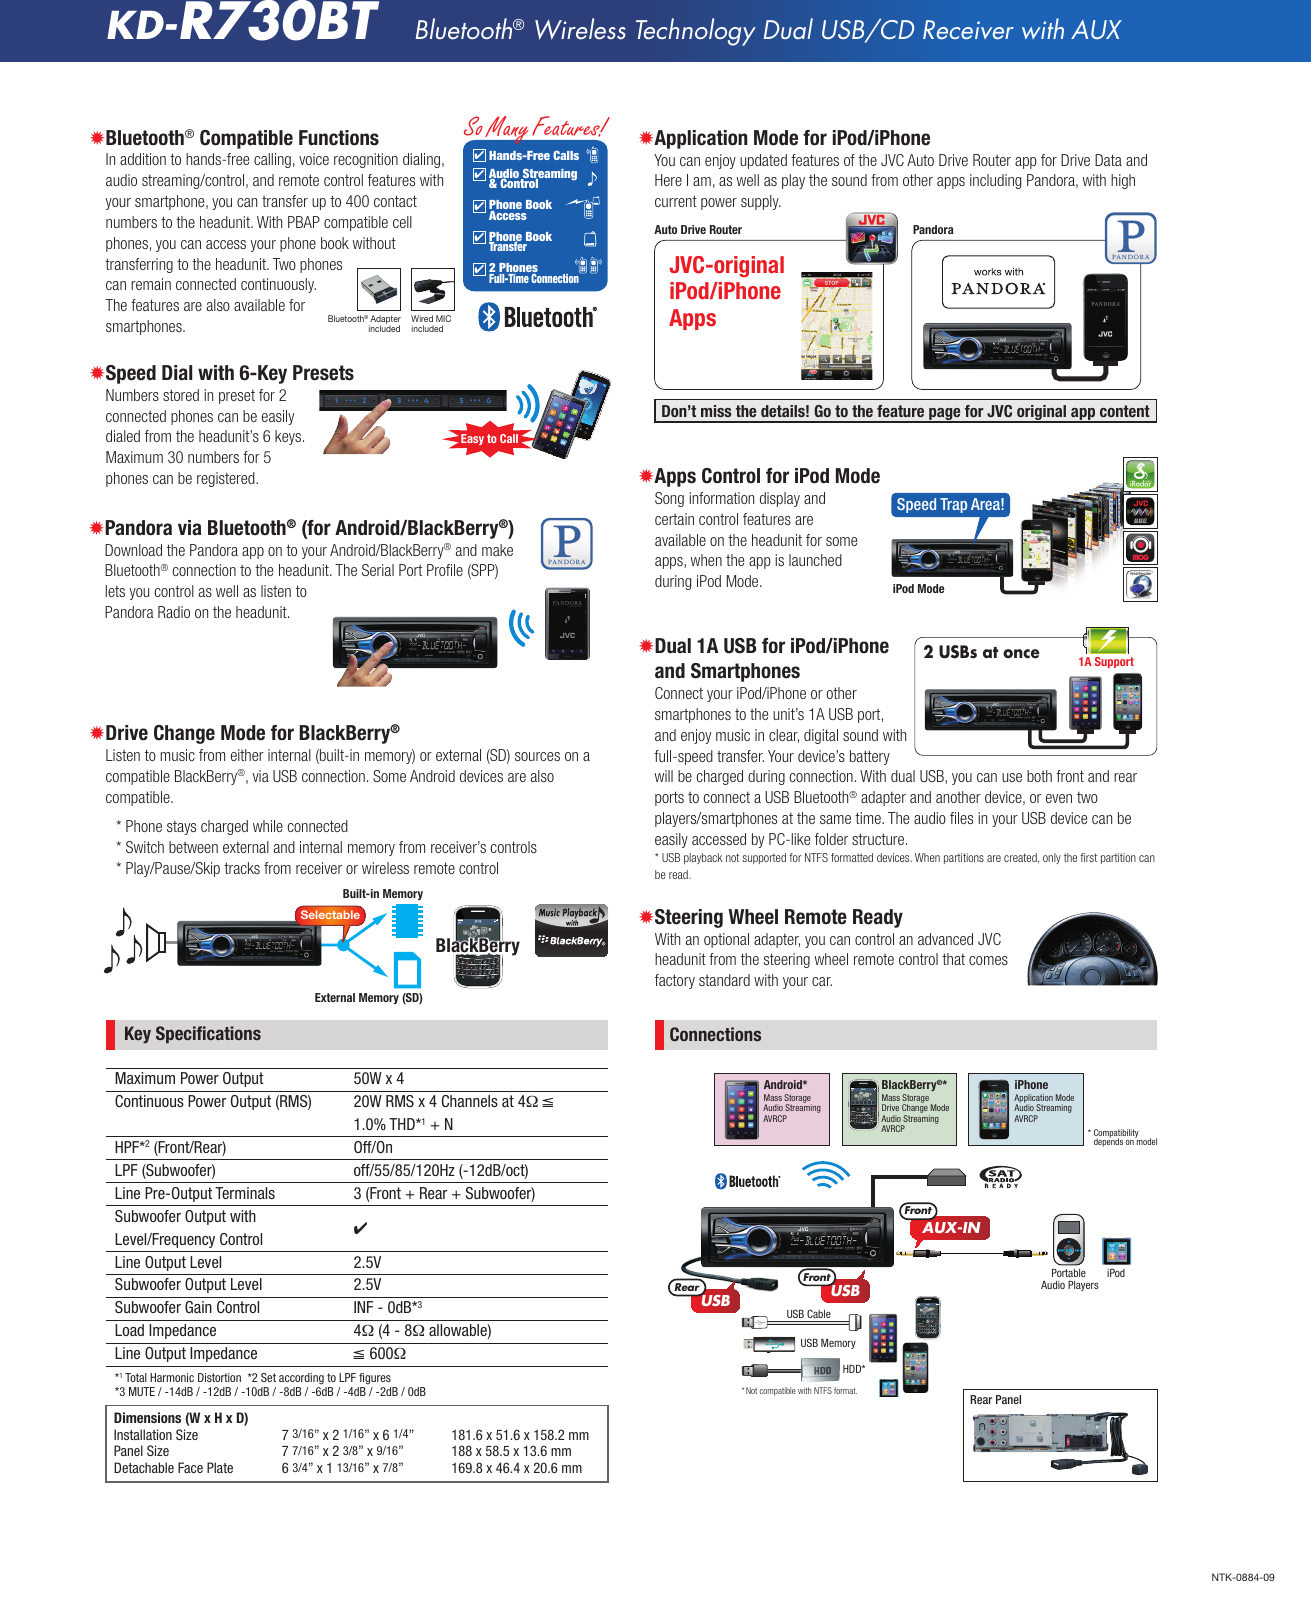 Page 2 of 2 - Jvc Jvc-Car-Stereo-System-Kd-R730Bt-Users-Manual- KD-R730BT_Tech_a  Jvc-car-stereo-system-kd-r730bt-users-manual